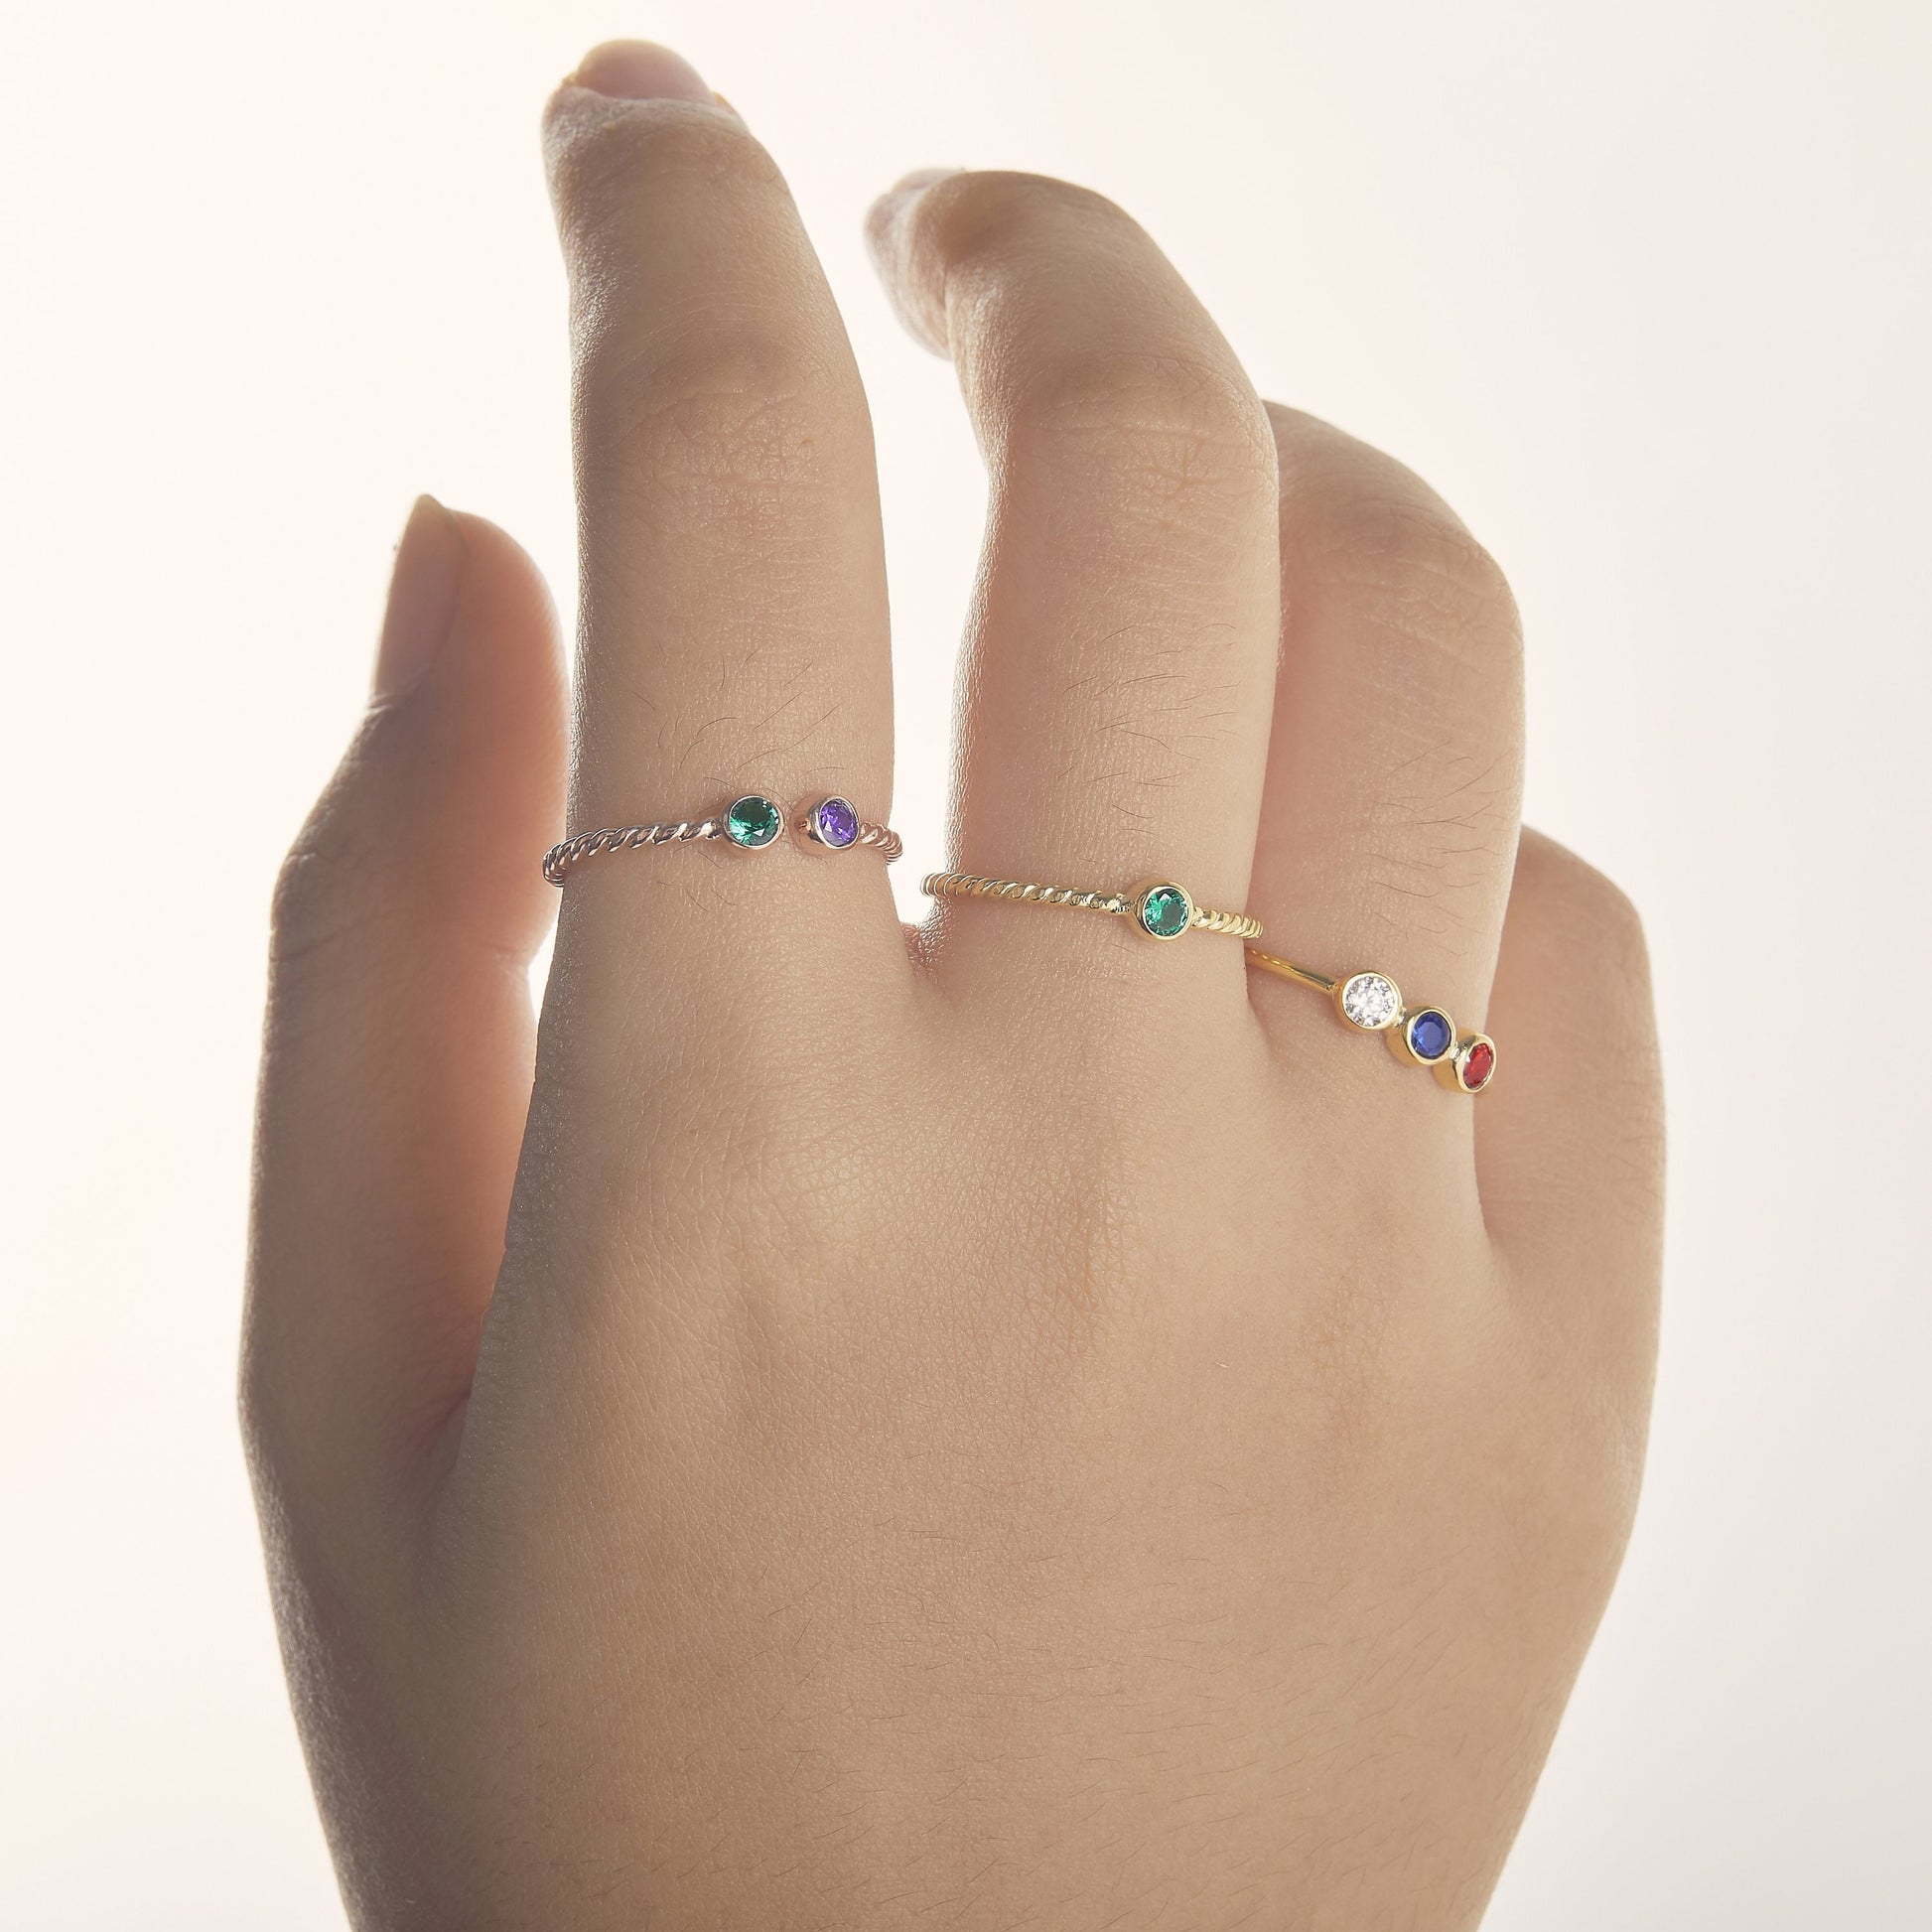 Personalized Stackable Ring | Dual Birthstone Ring | Gemstone Ring | Birthstone Jewelry | Stacking Ring |  Family Ring | Dainty Promise Ring